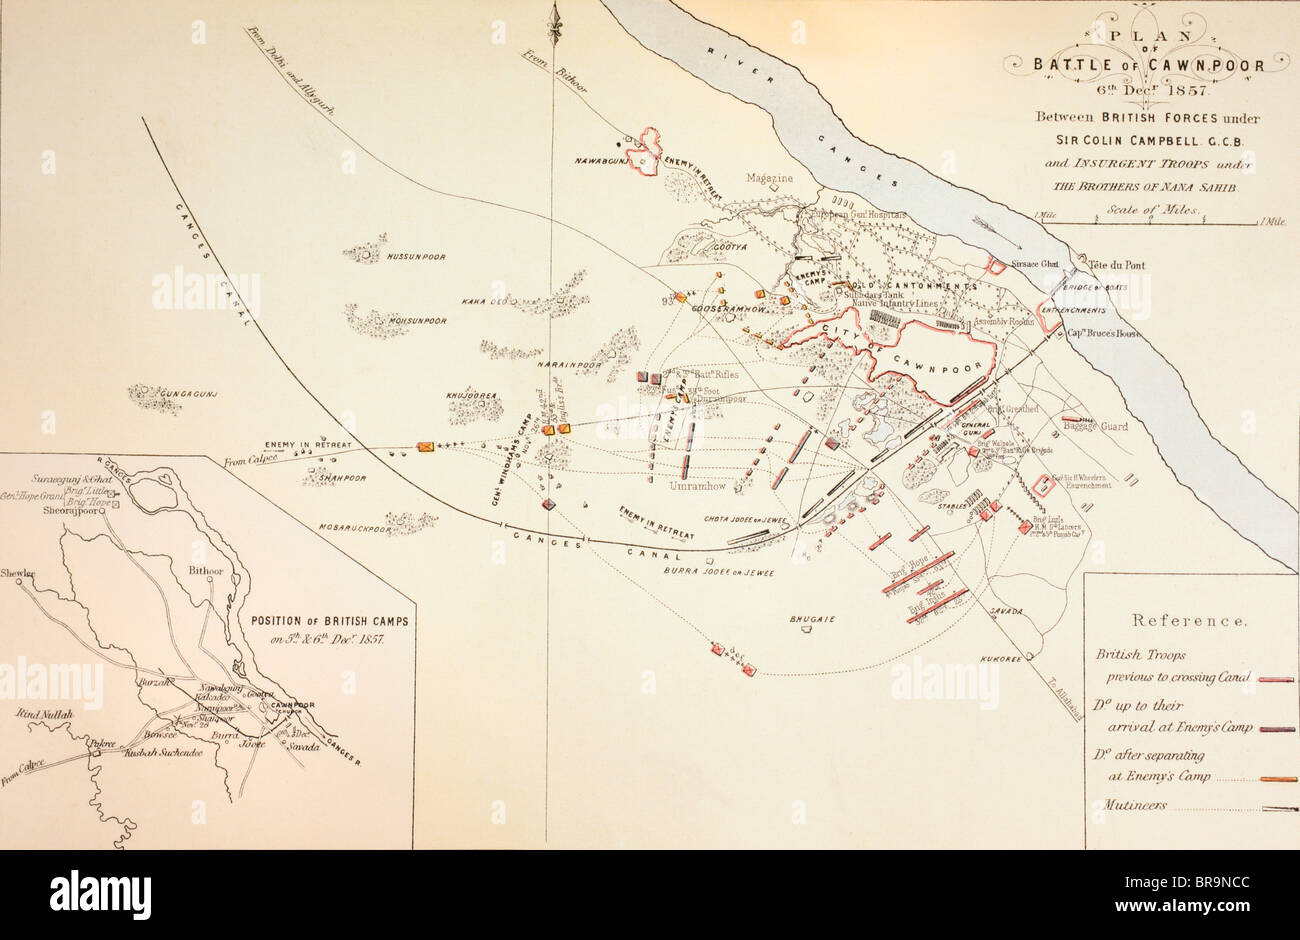 Plan of the Battle of Cawnpore, India,1857. Stock Photo